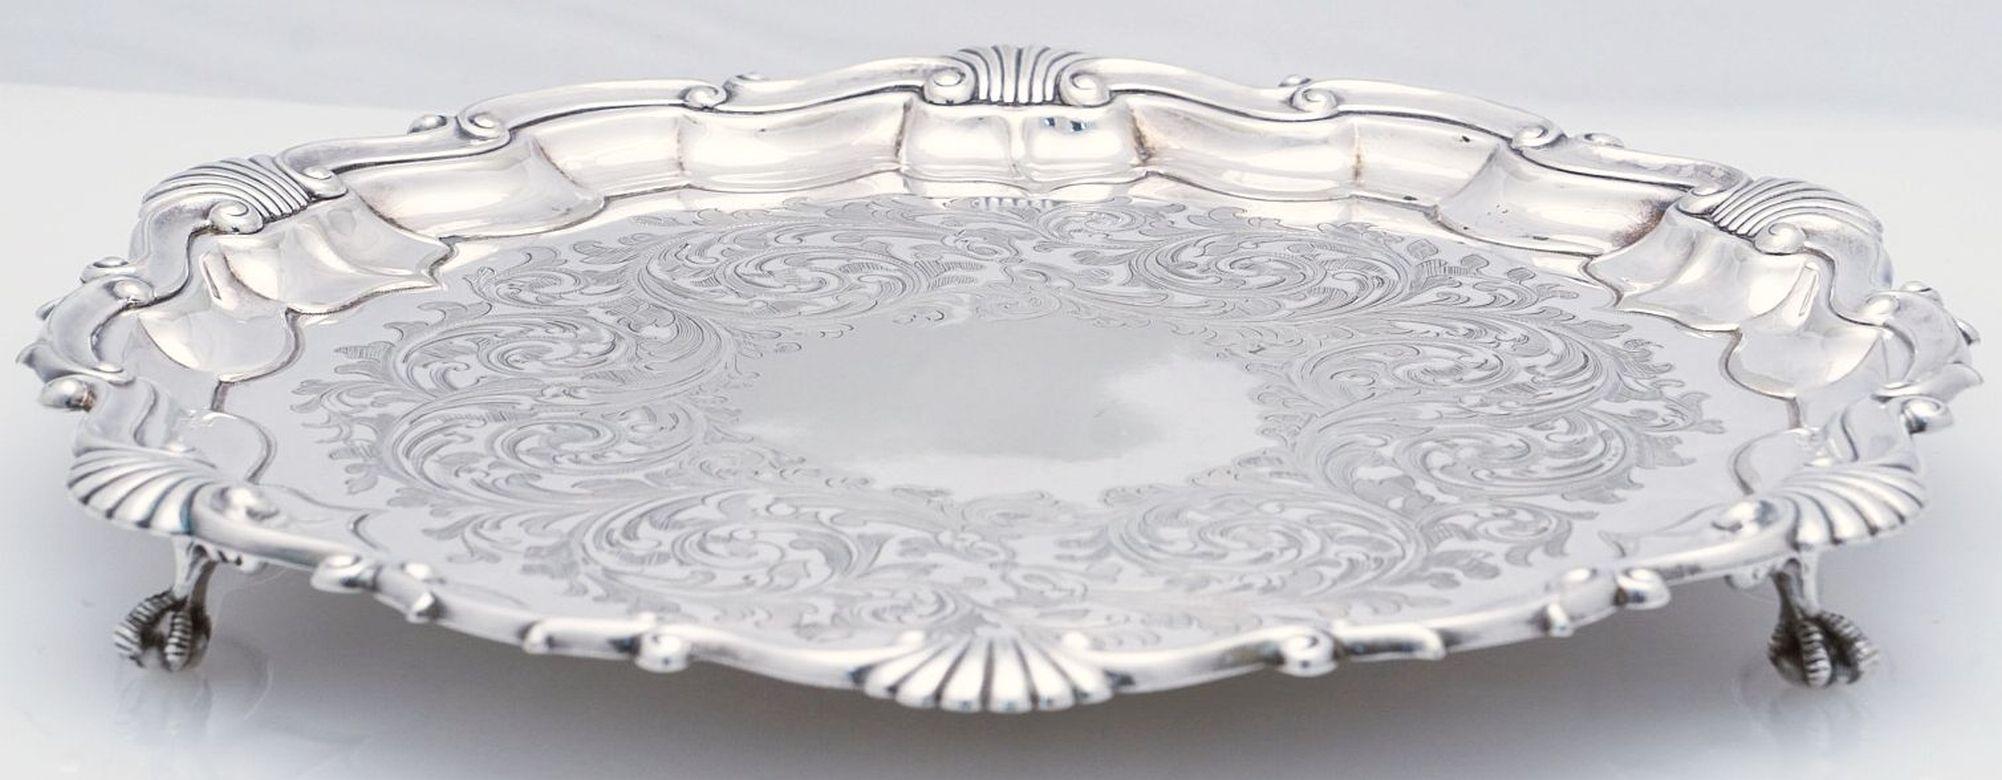 English Silver Footed Tray or Salver with Seashell Motif For Sale 3